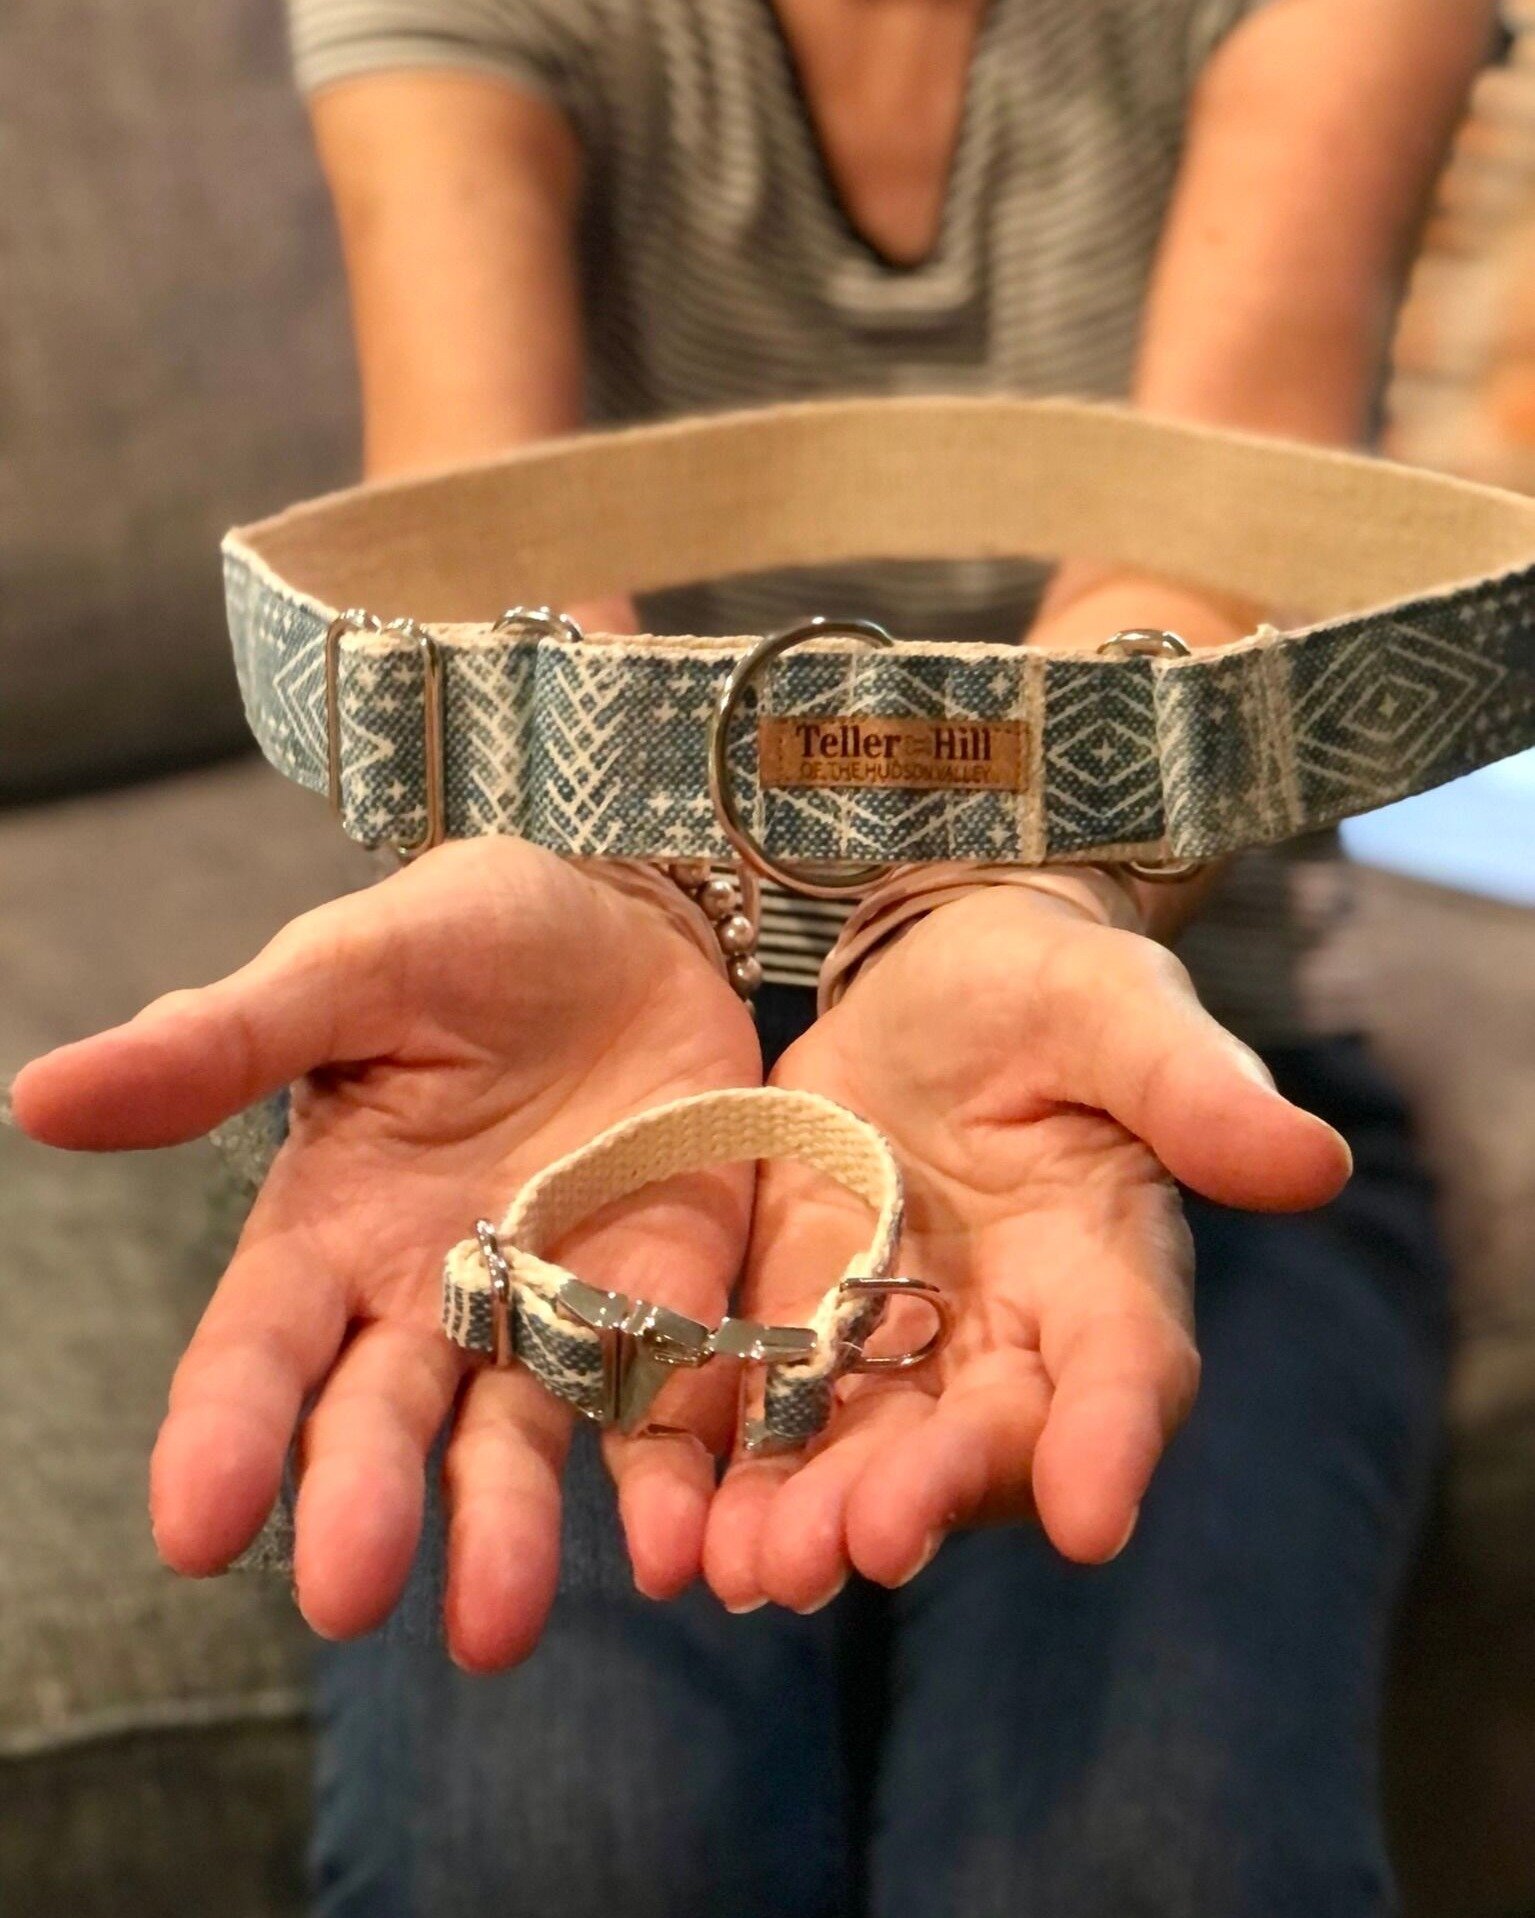 Whether big or small, Teller Hill does it all! Today is the LAST DAY to order your personalized gifts to get them by Christmas so don't delay! Link in bio to order and get your perfect fit! 
.
.
#tellerhill #etsy #dogcollars #handmade #hempdogcollar 